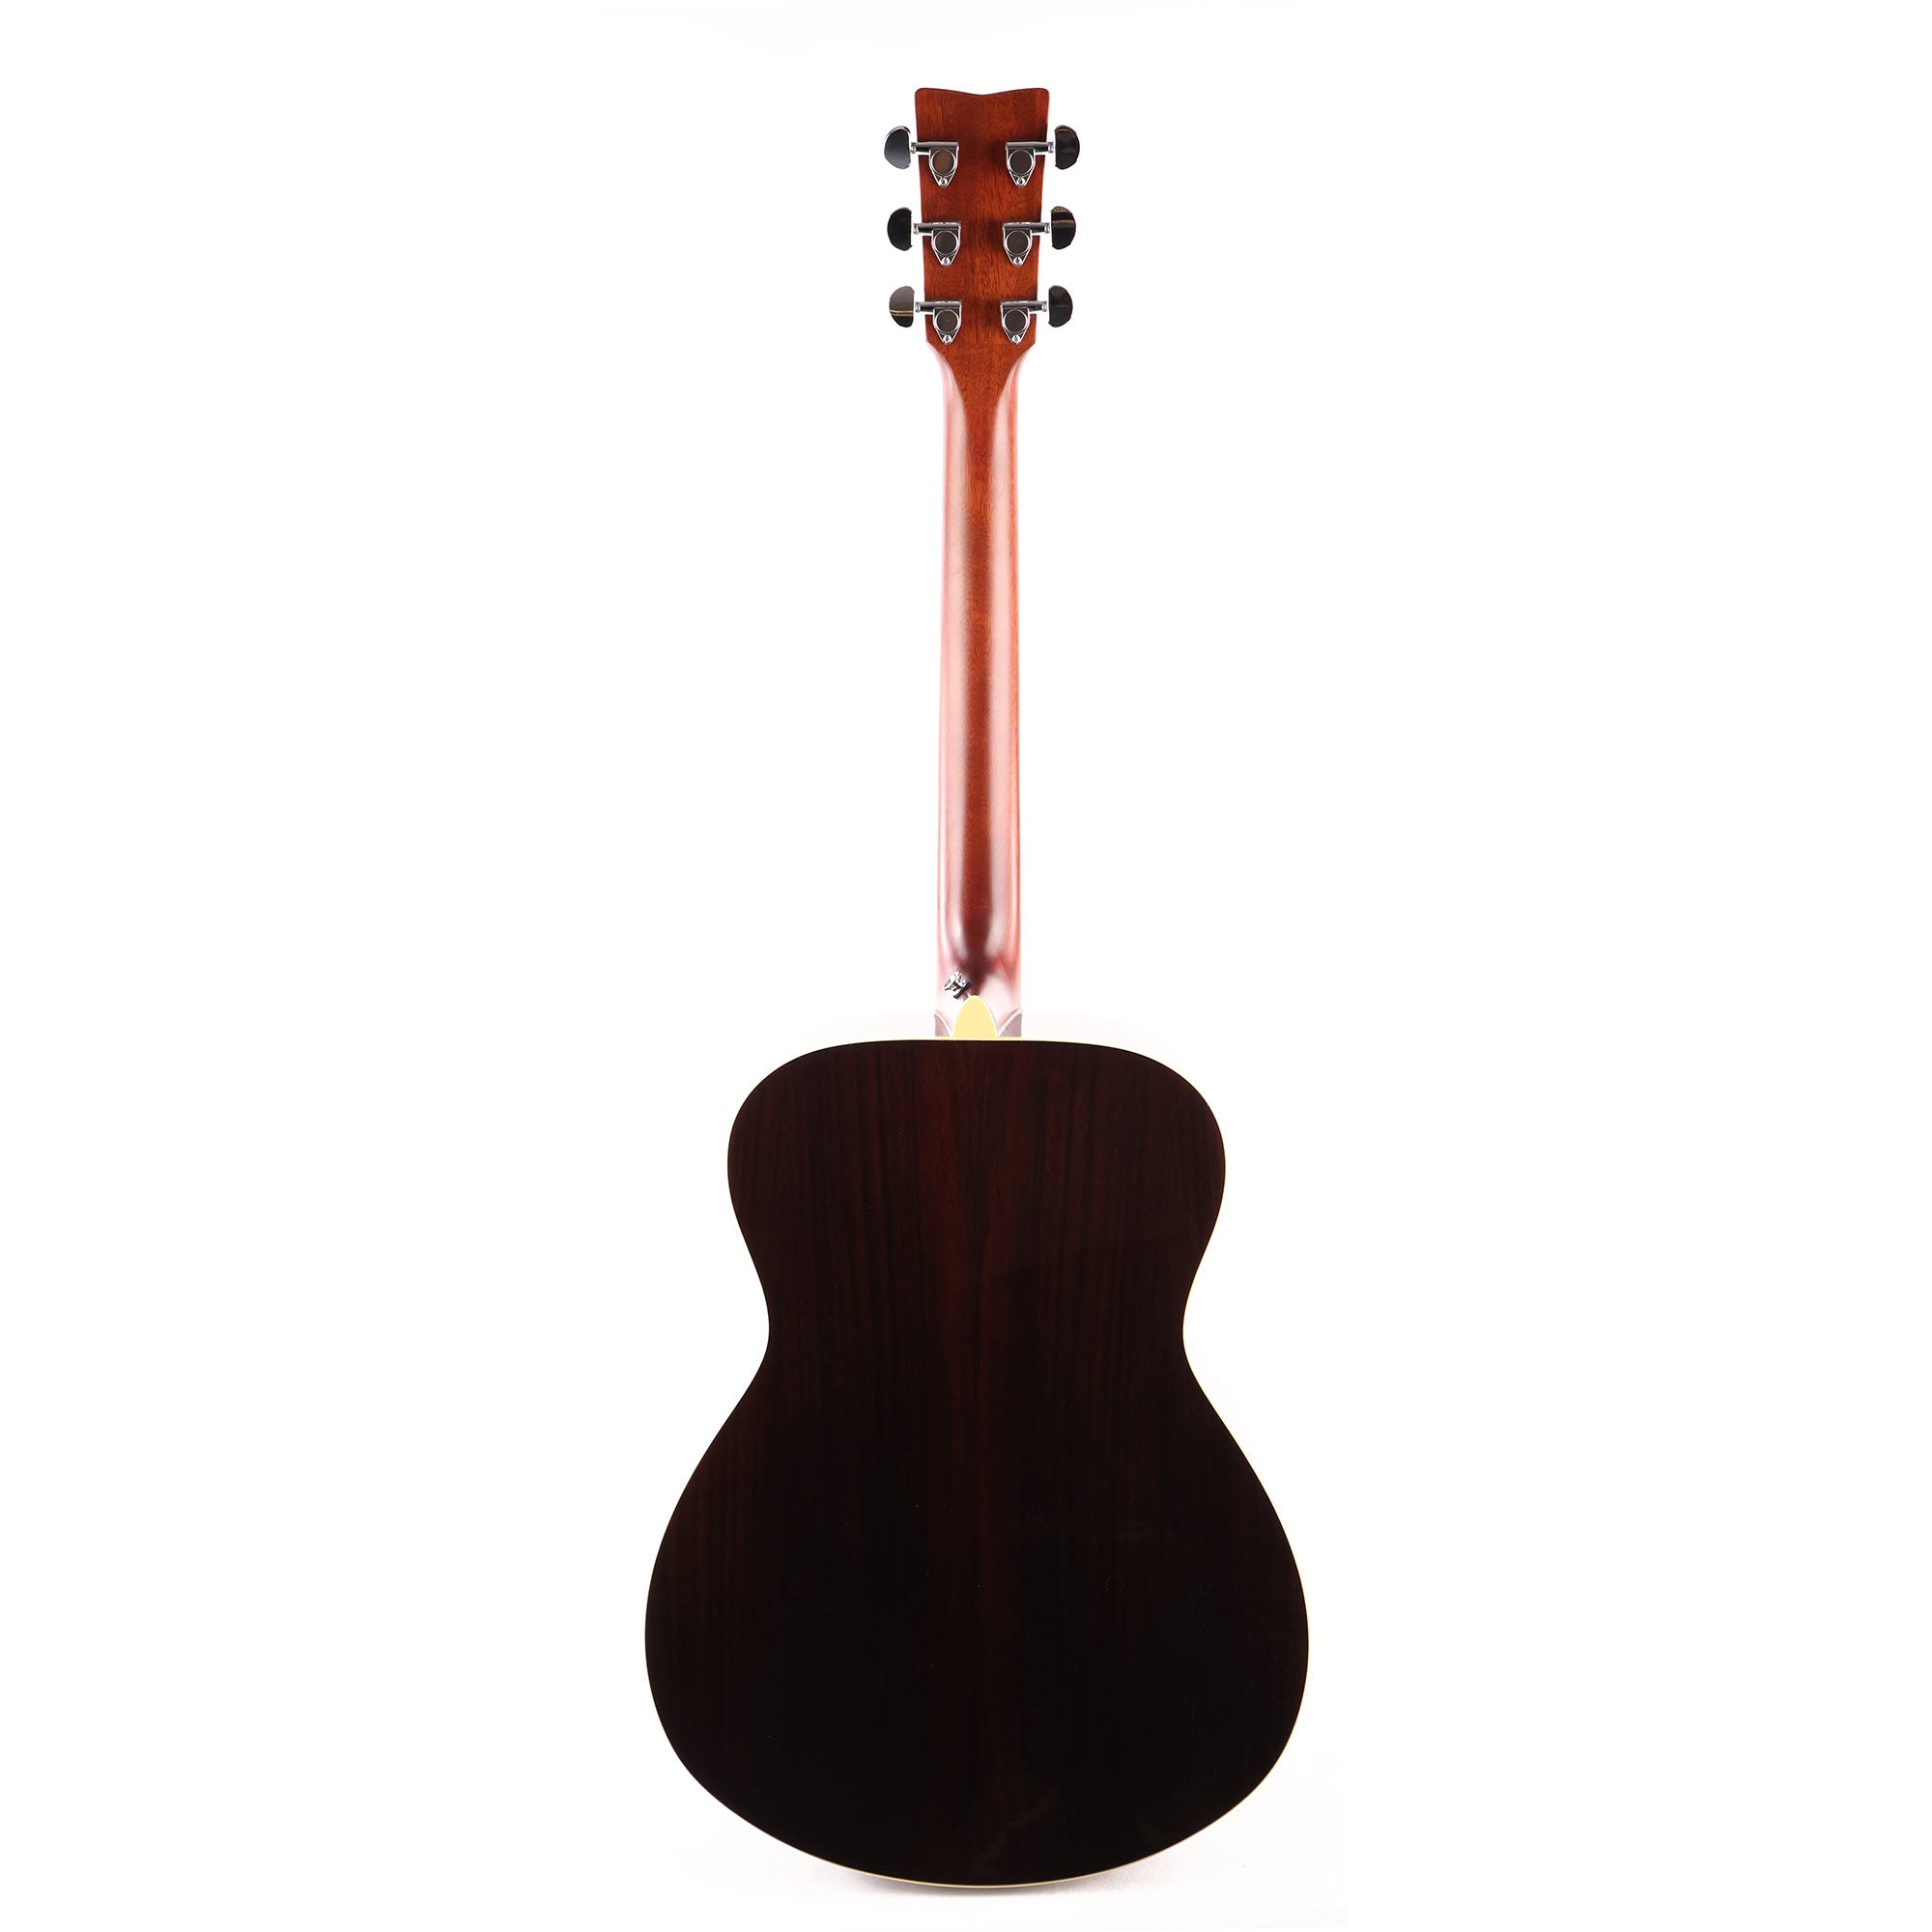 Yamaha FS830 Concert Acoustic Natural | The Music Zoo